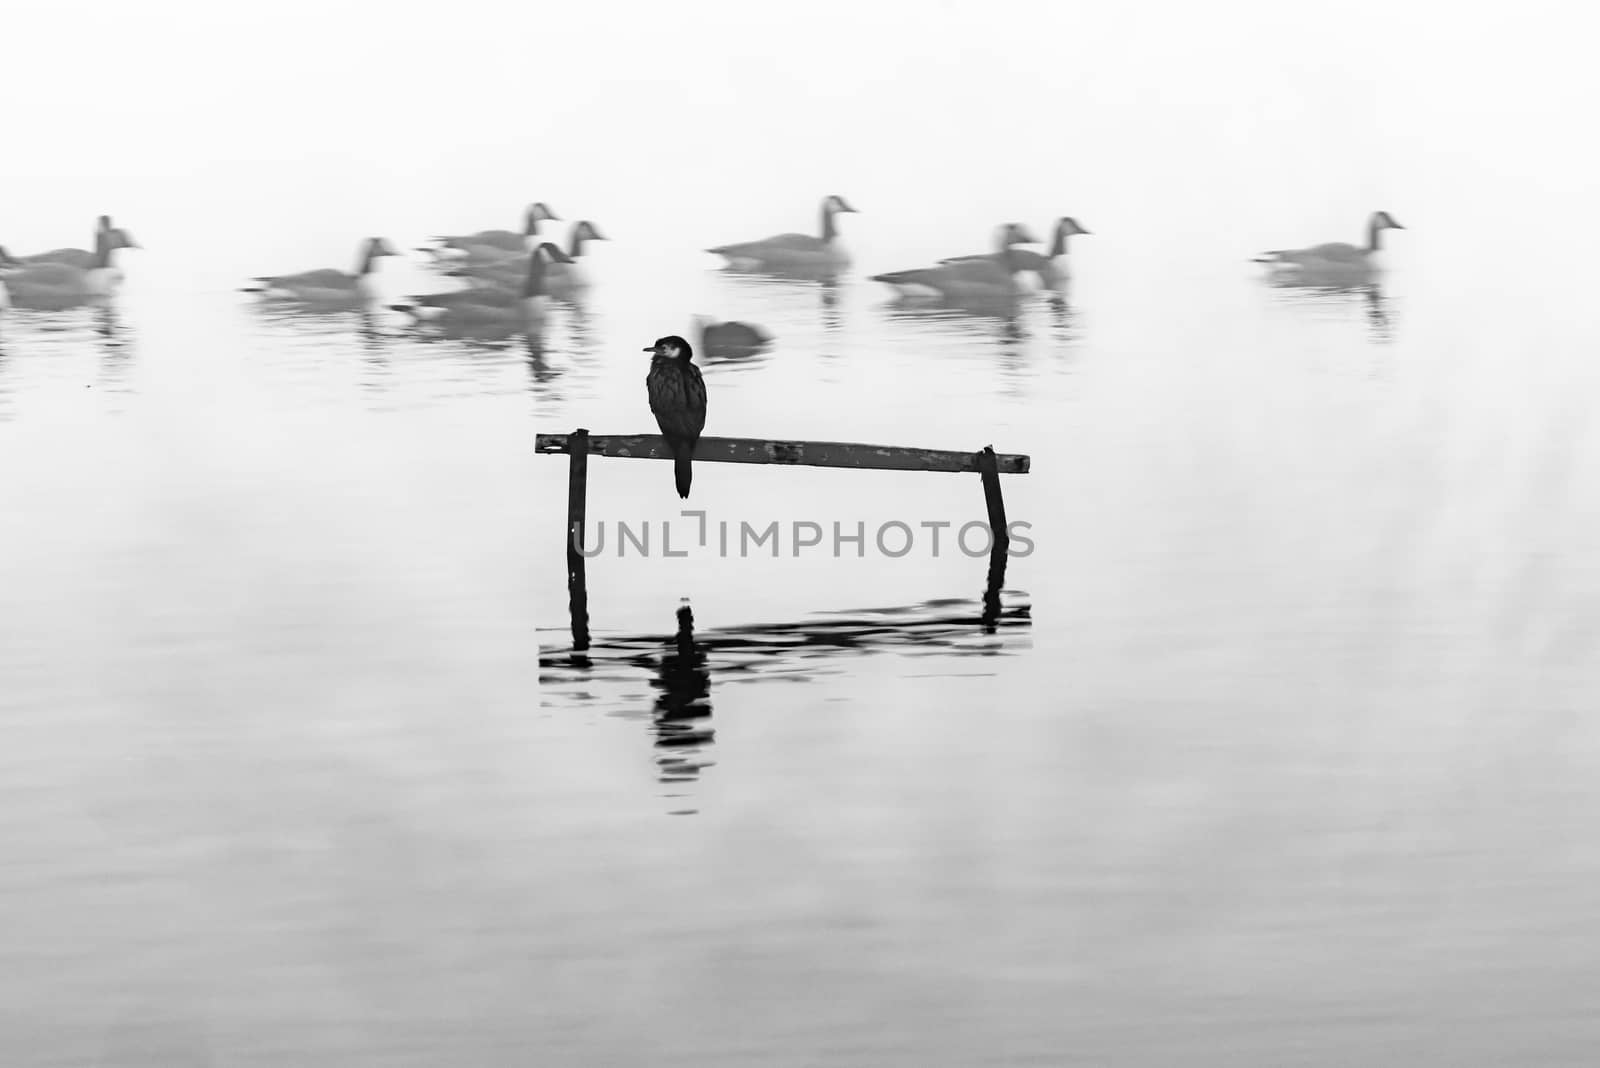 Little shag or cormorant perched on stand in calm water surround by brians101